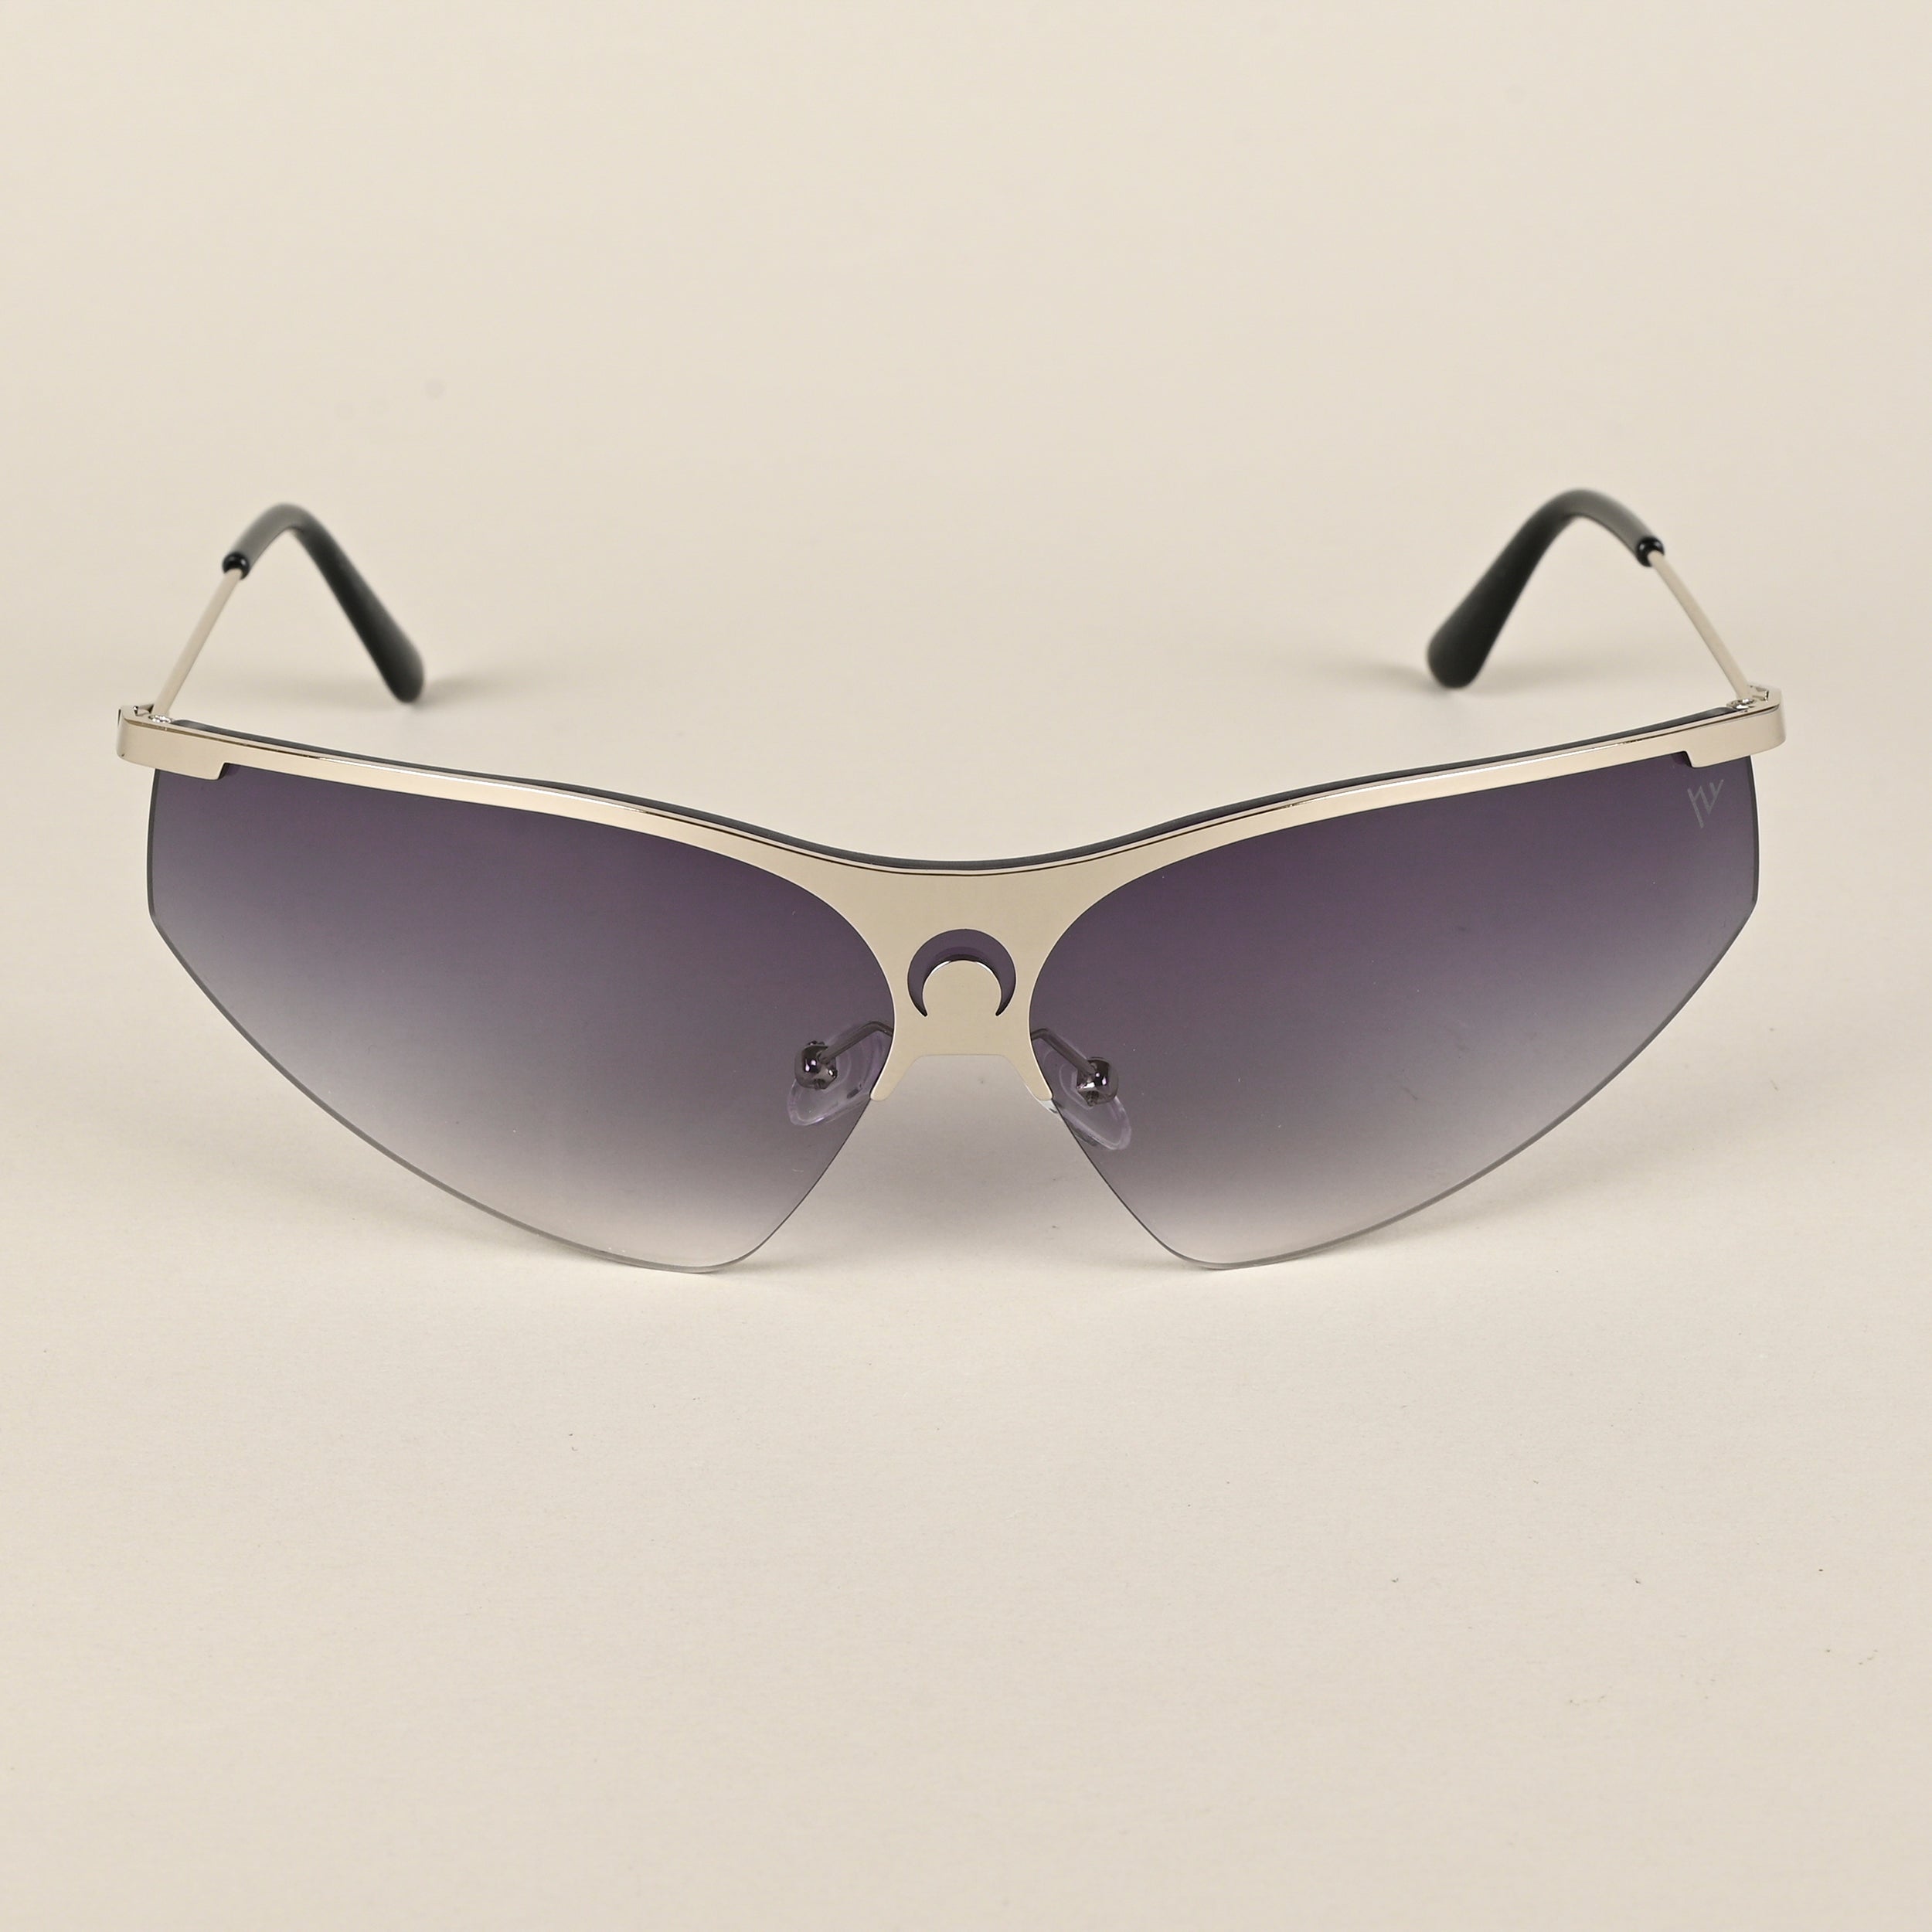 Voyage Grey & Clear Wrap-Around Sunglasses for Men & Women - MG4218